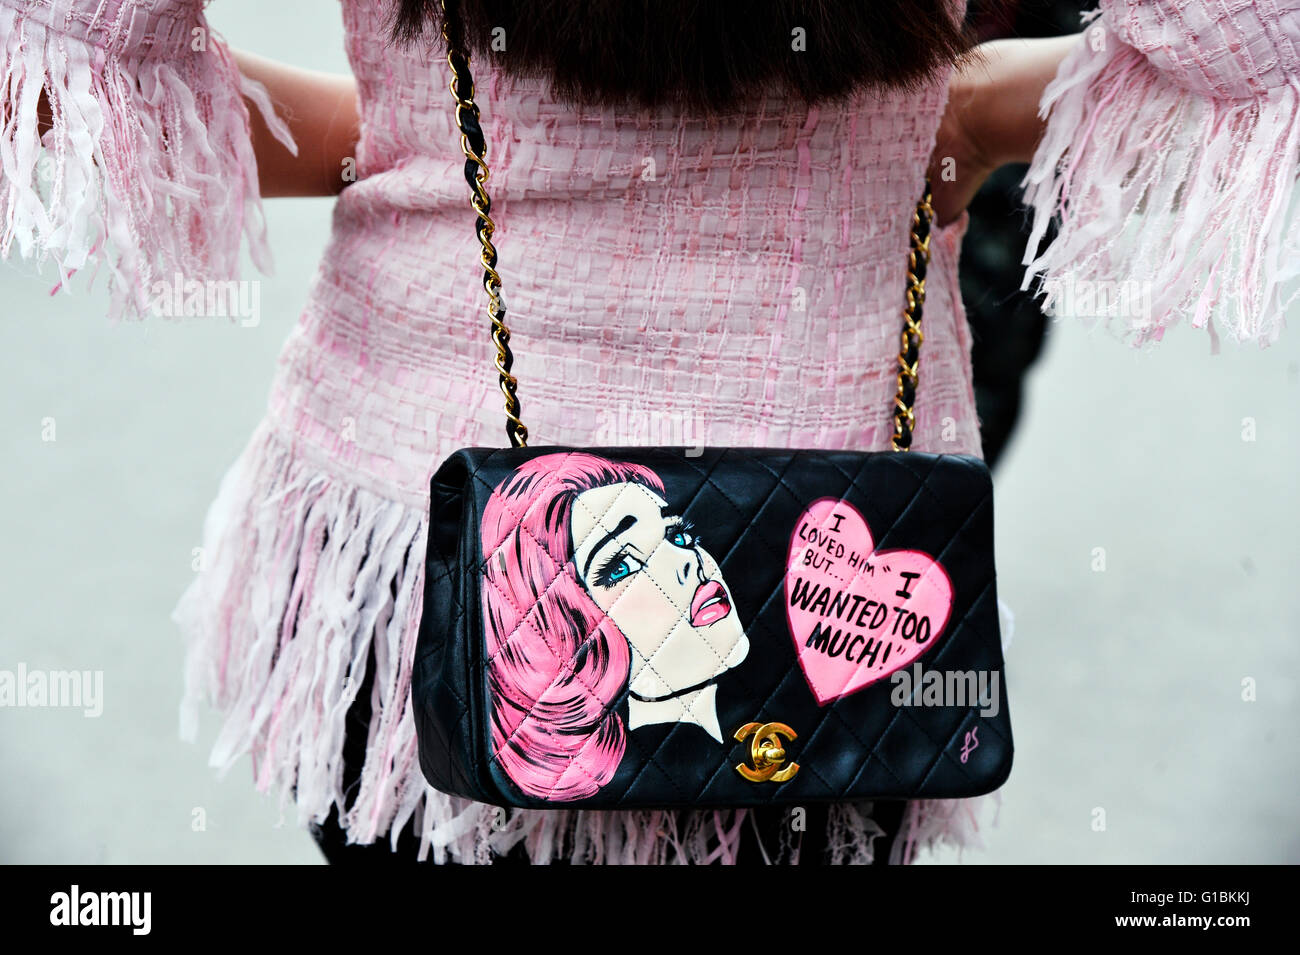 Chanel Fall Winter Collection Banque d'image et photos - Alamy